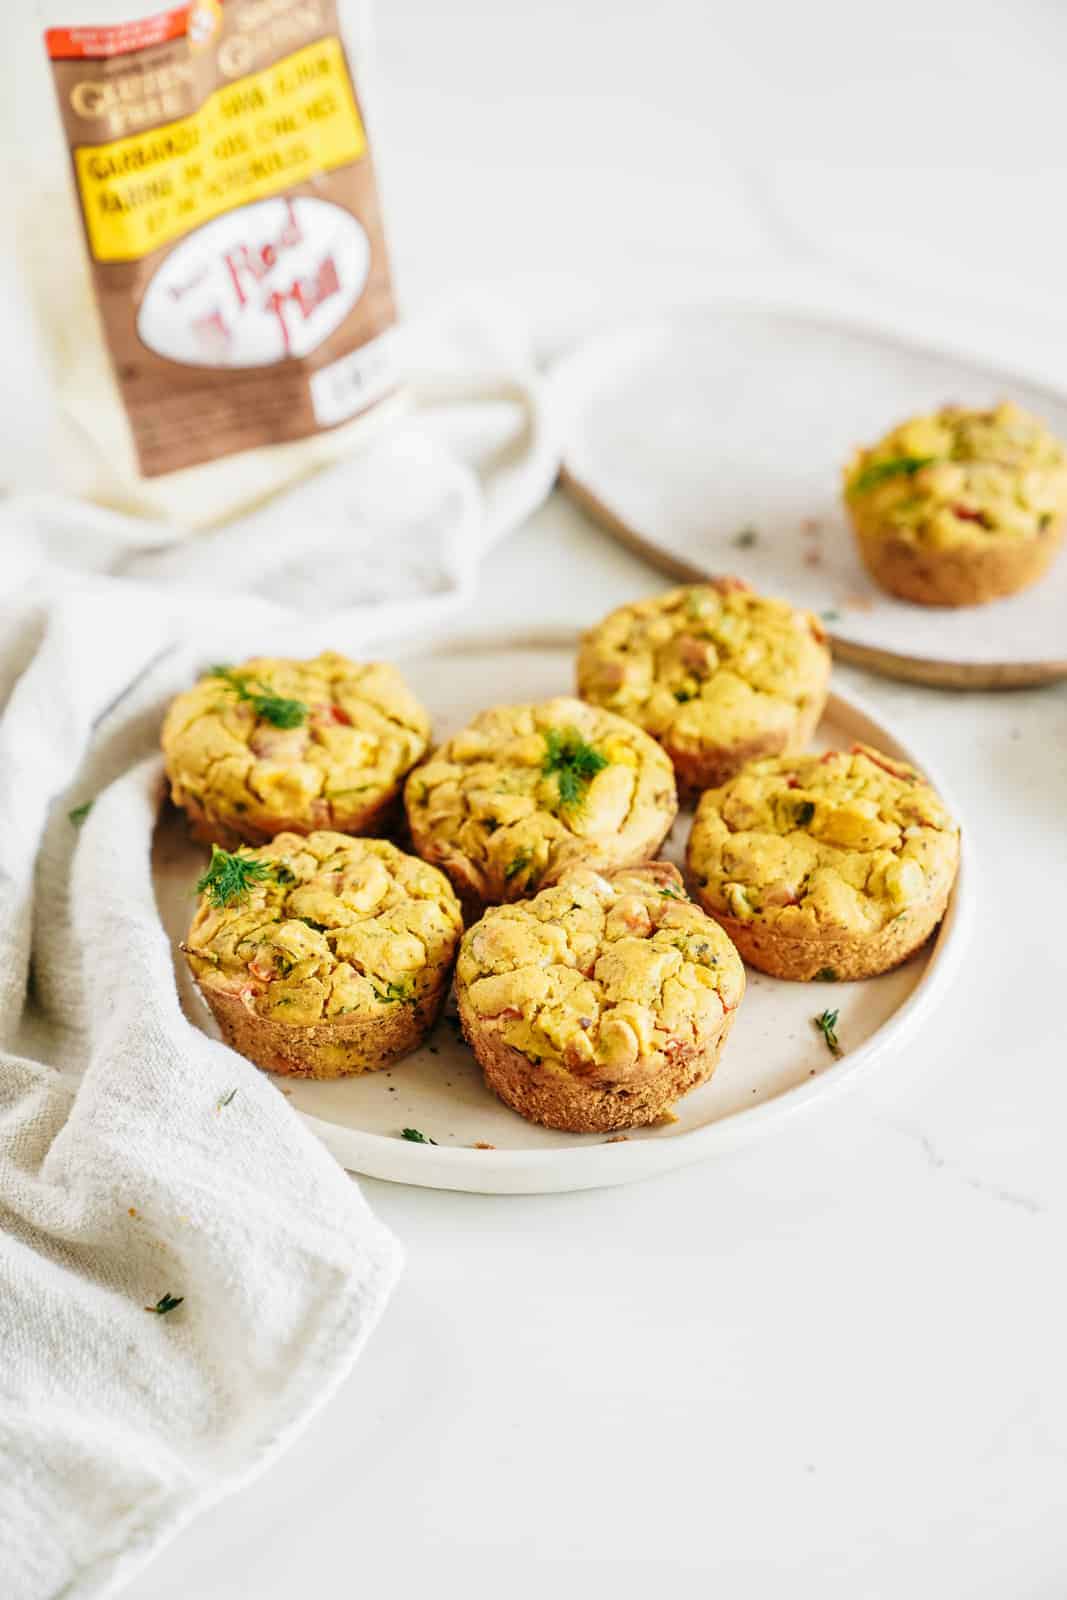 Vegan Chickpea Flour Muffins sitting on a plate with Bob's Red Mill flour in the background.